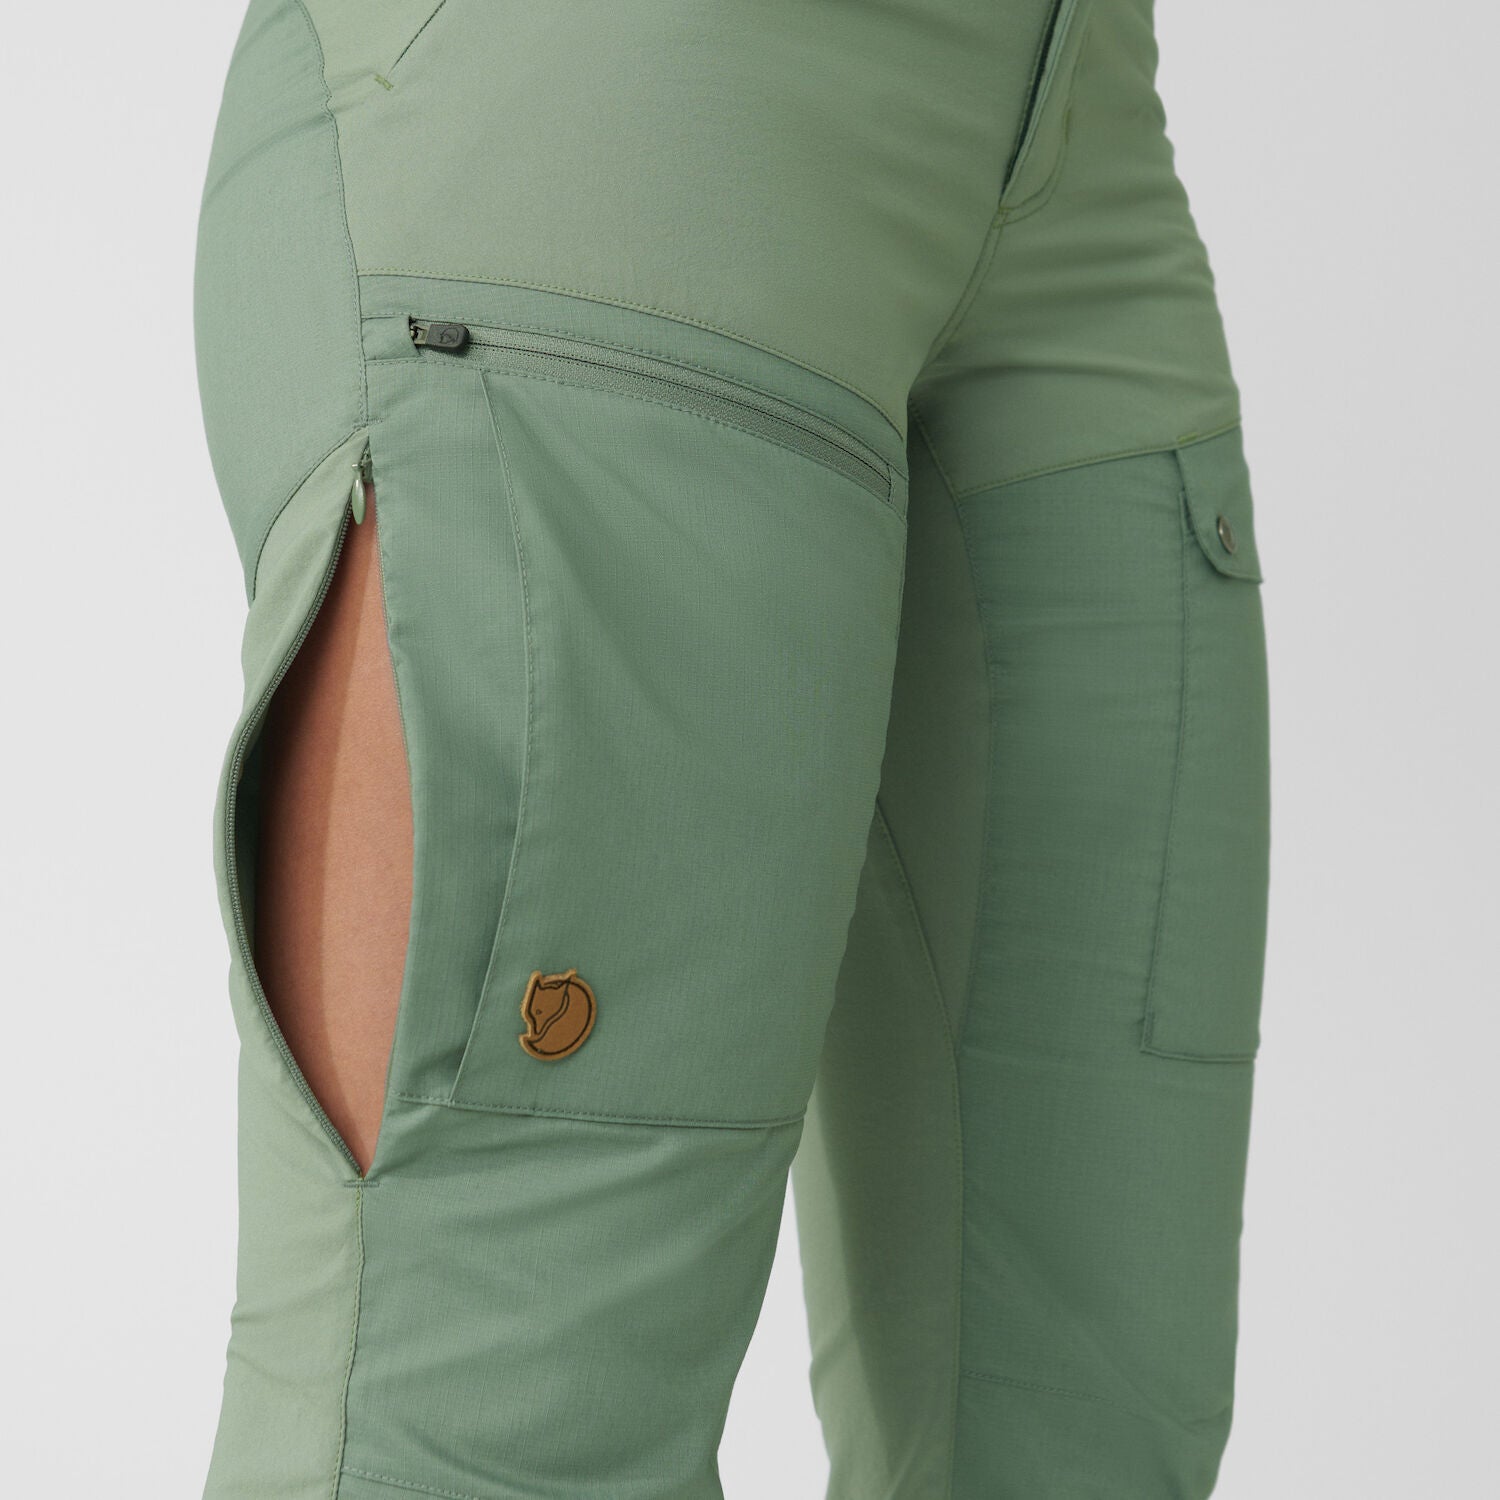 branded women trousers with big pockets